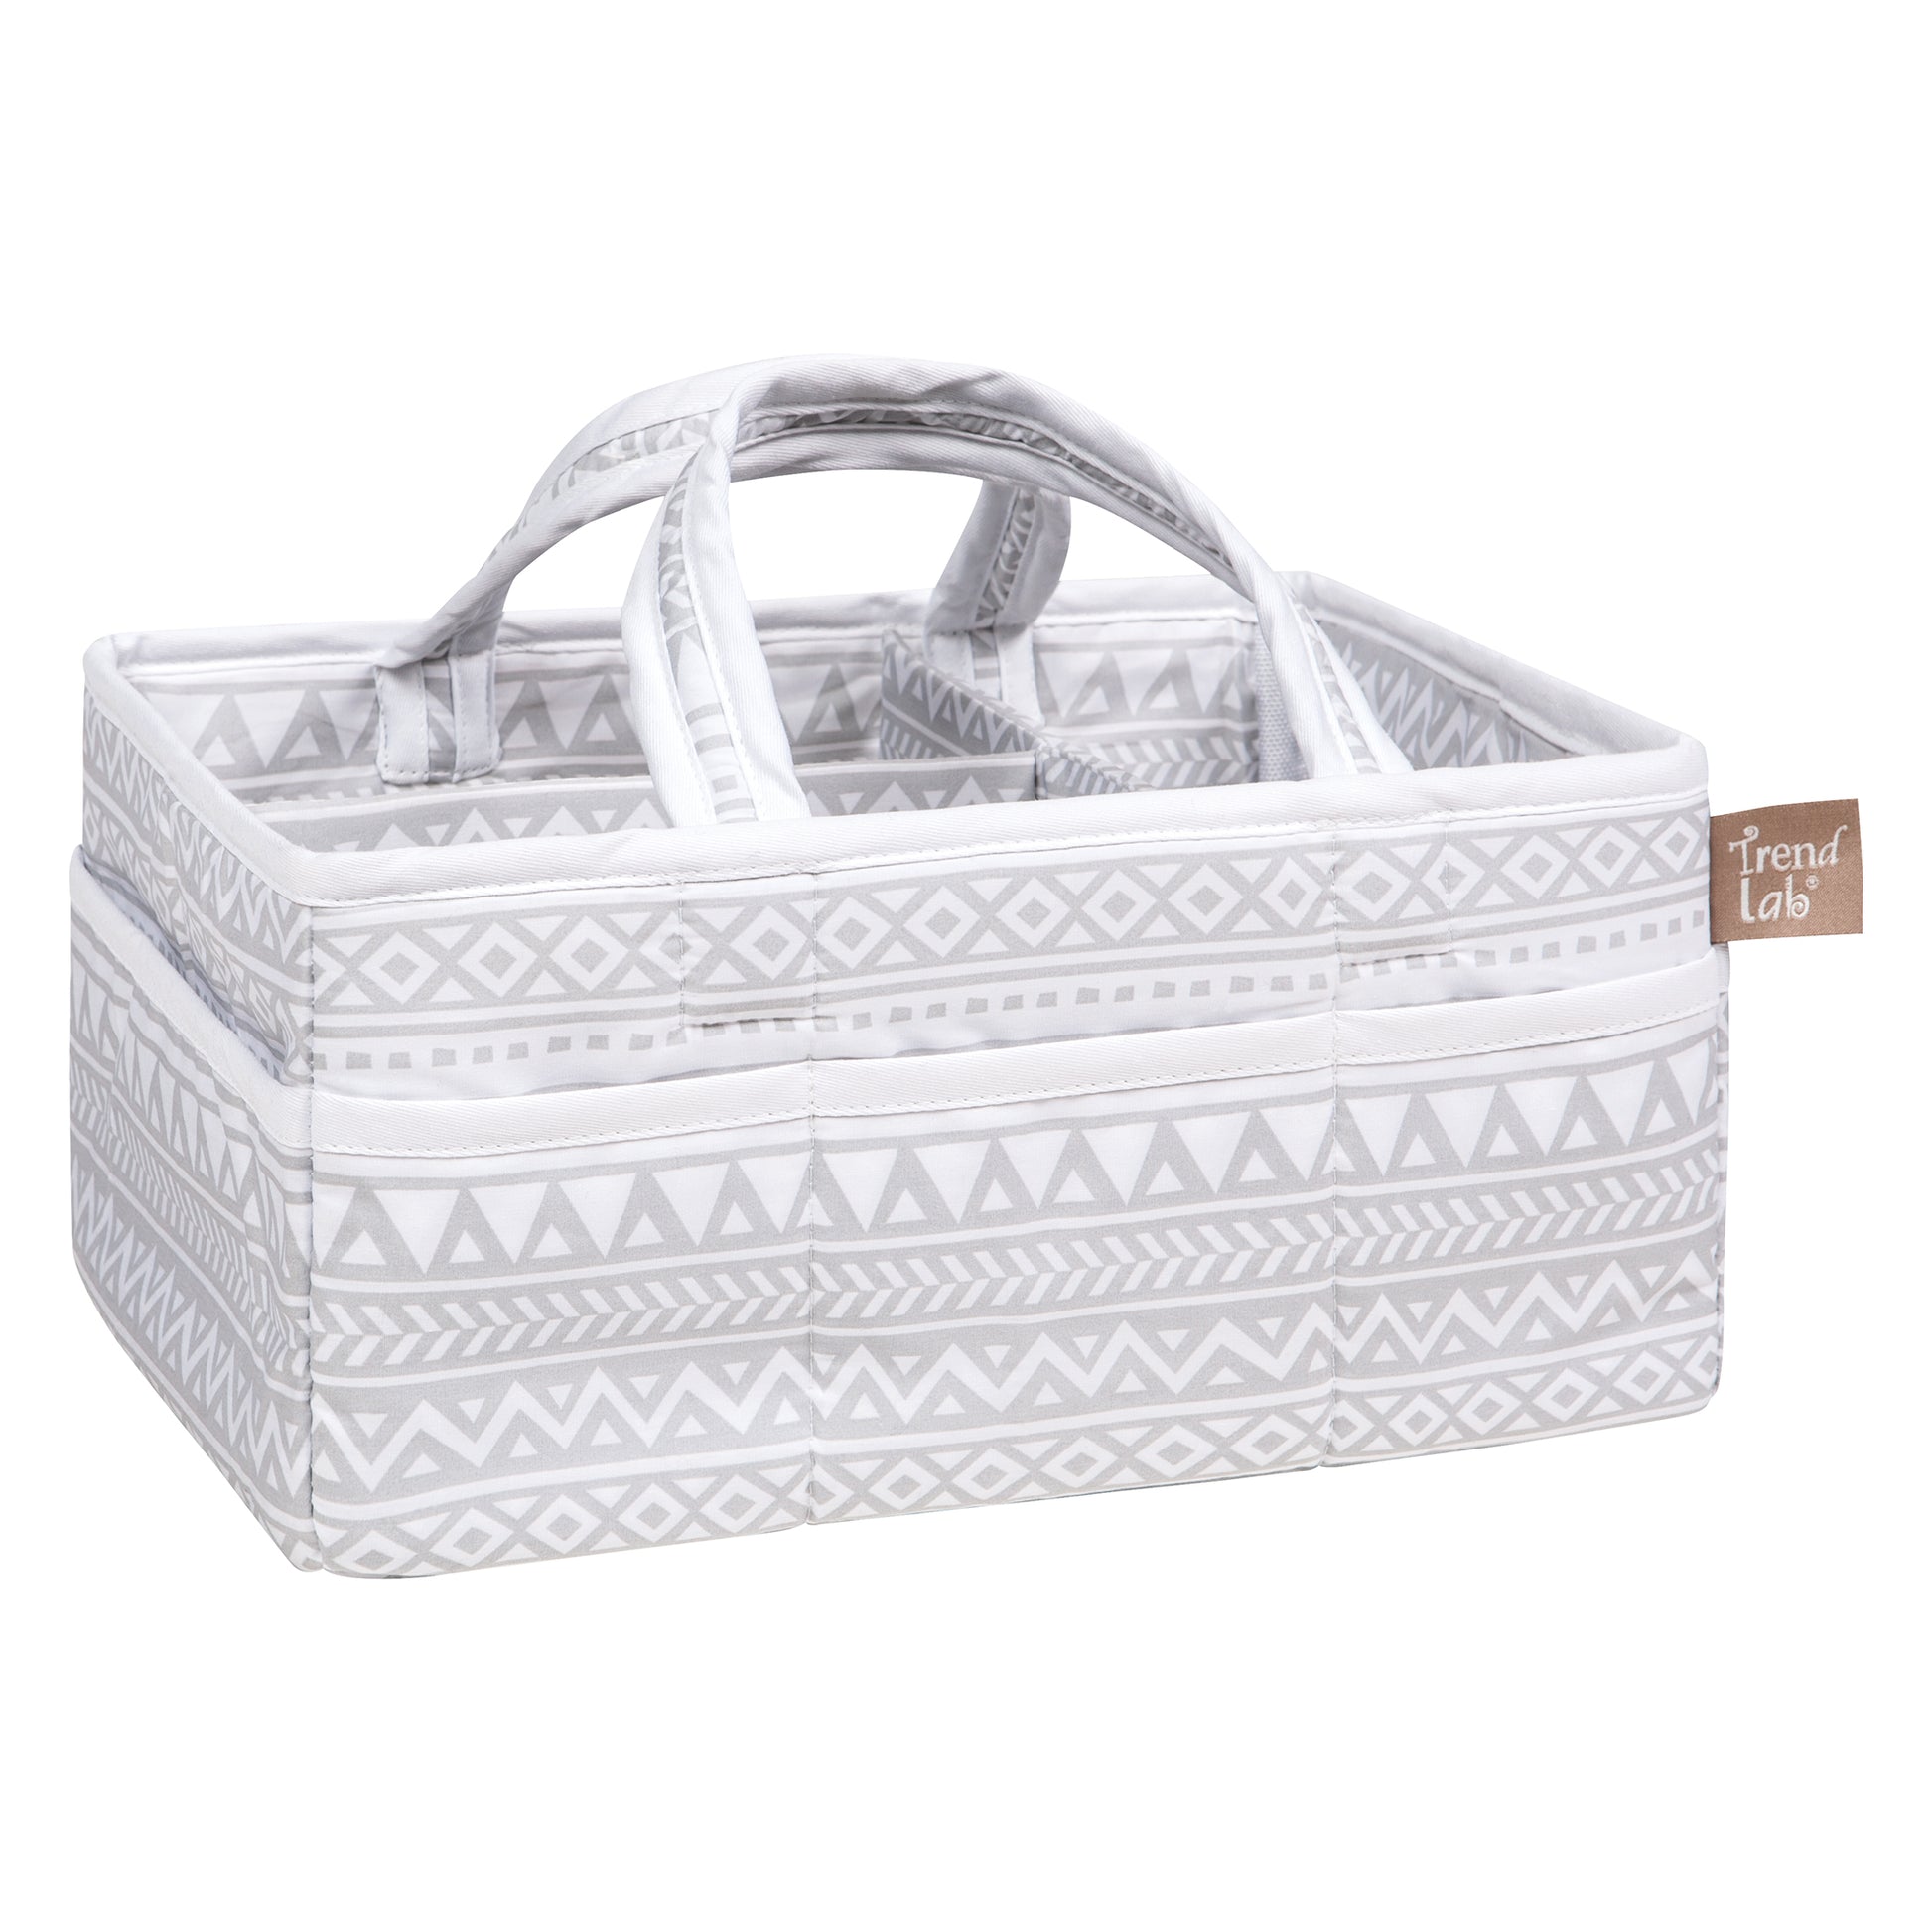 Aztec Forest Storage Caddy Angled Image- The body, lining and handles feature an Aztec print in gray and white and a solid white trim.